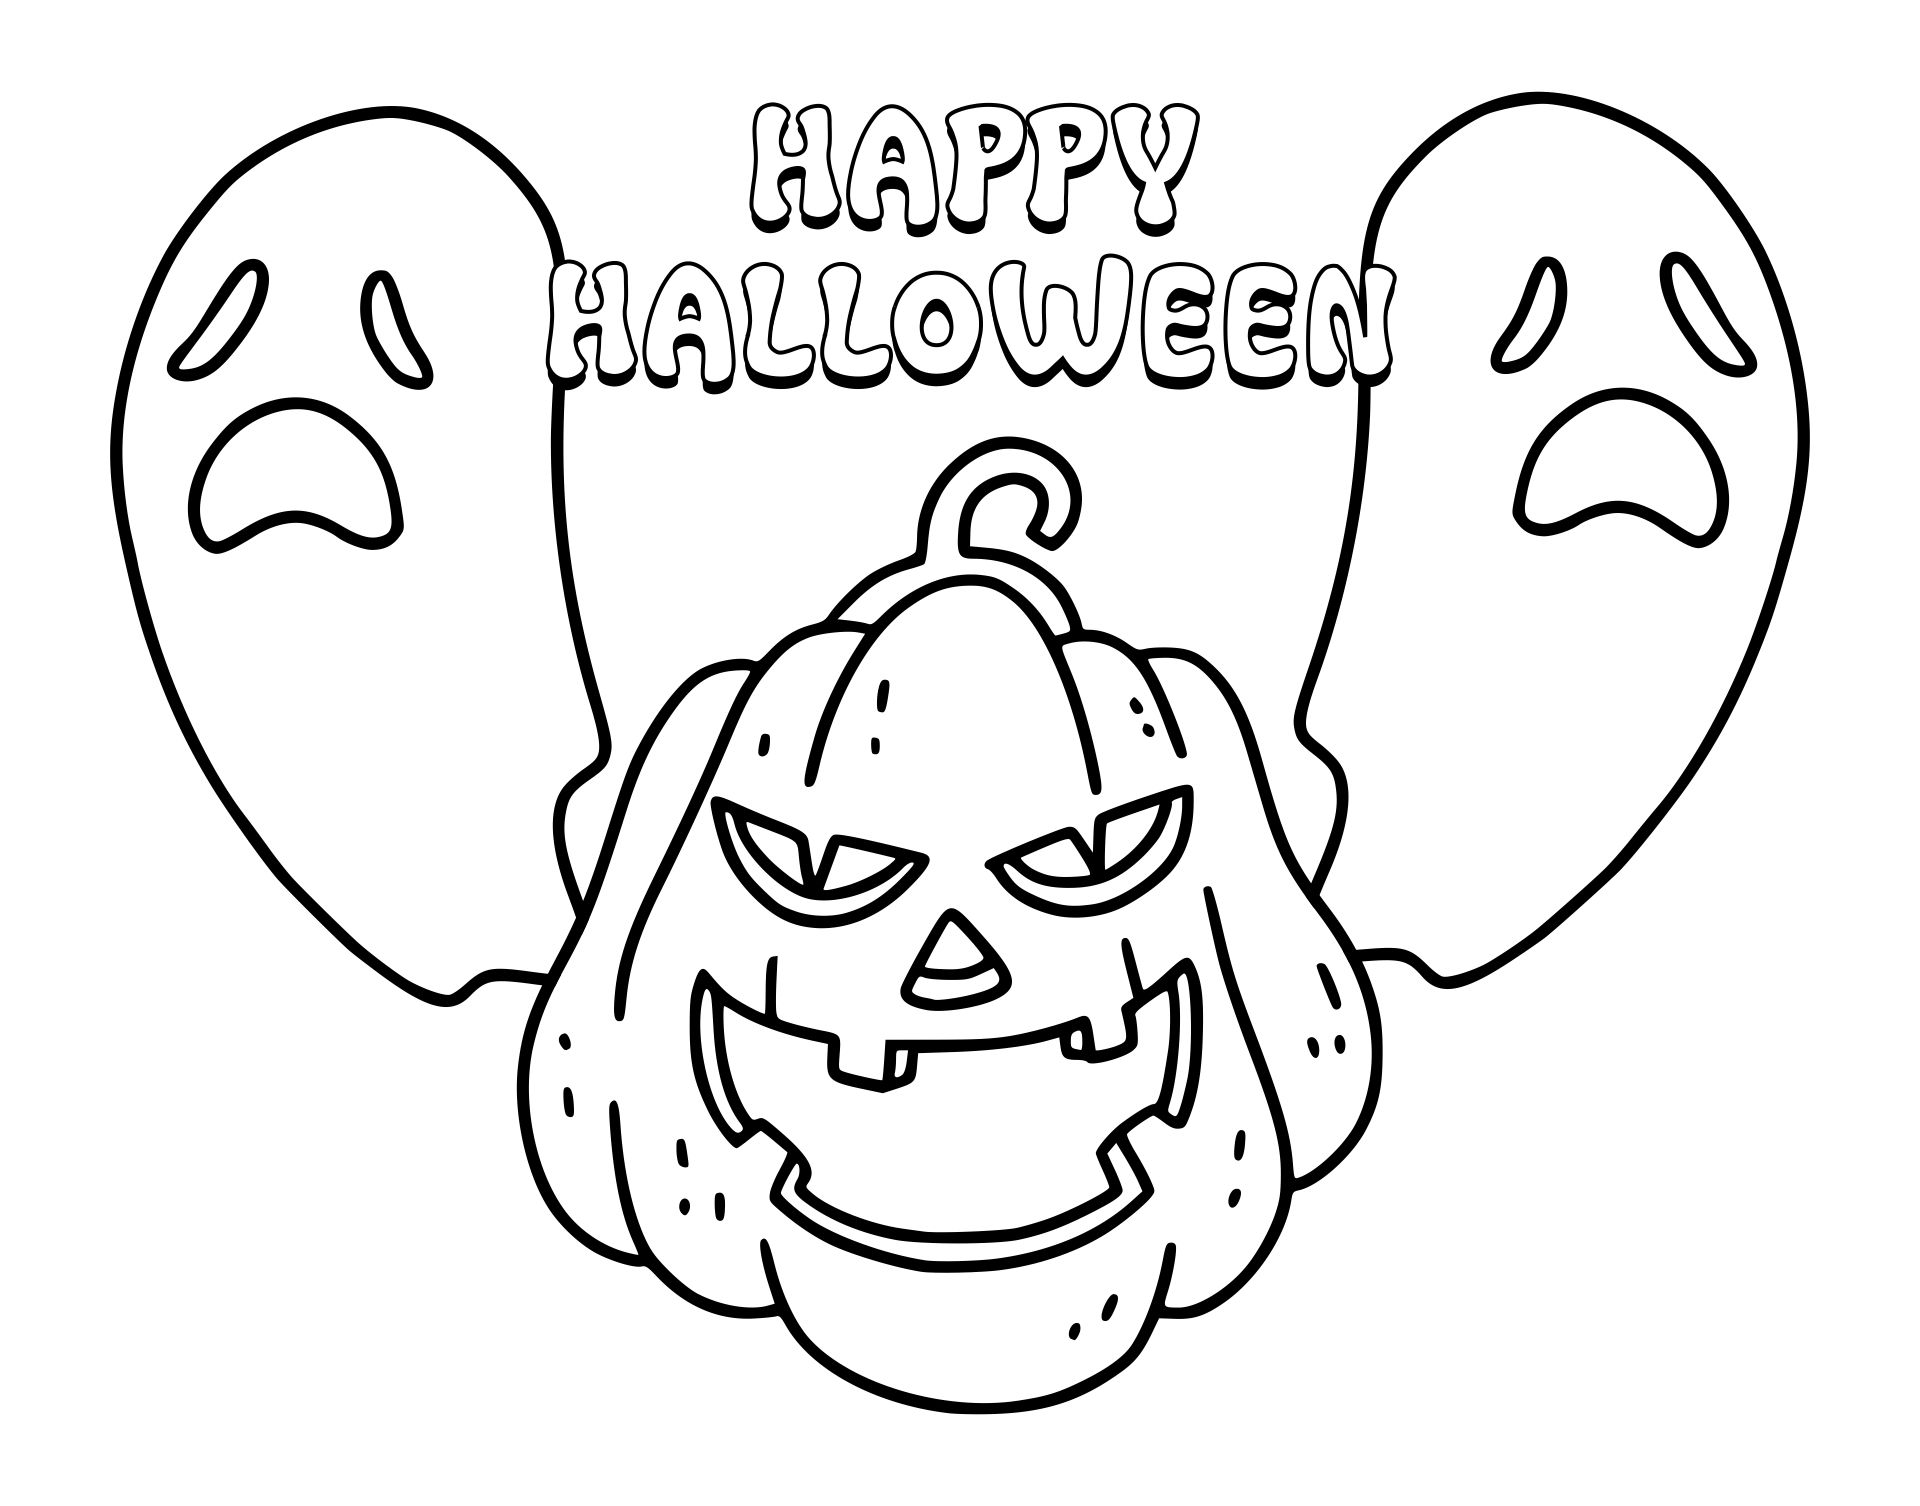 Pumpkin Jack-o-Lantern With Ghosts Coloring Page Printable